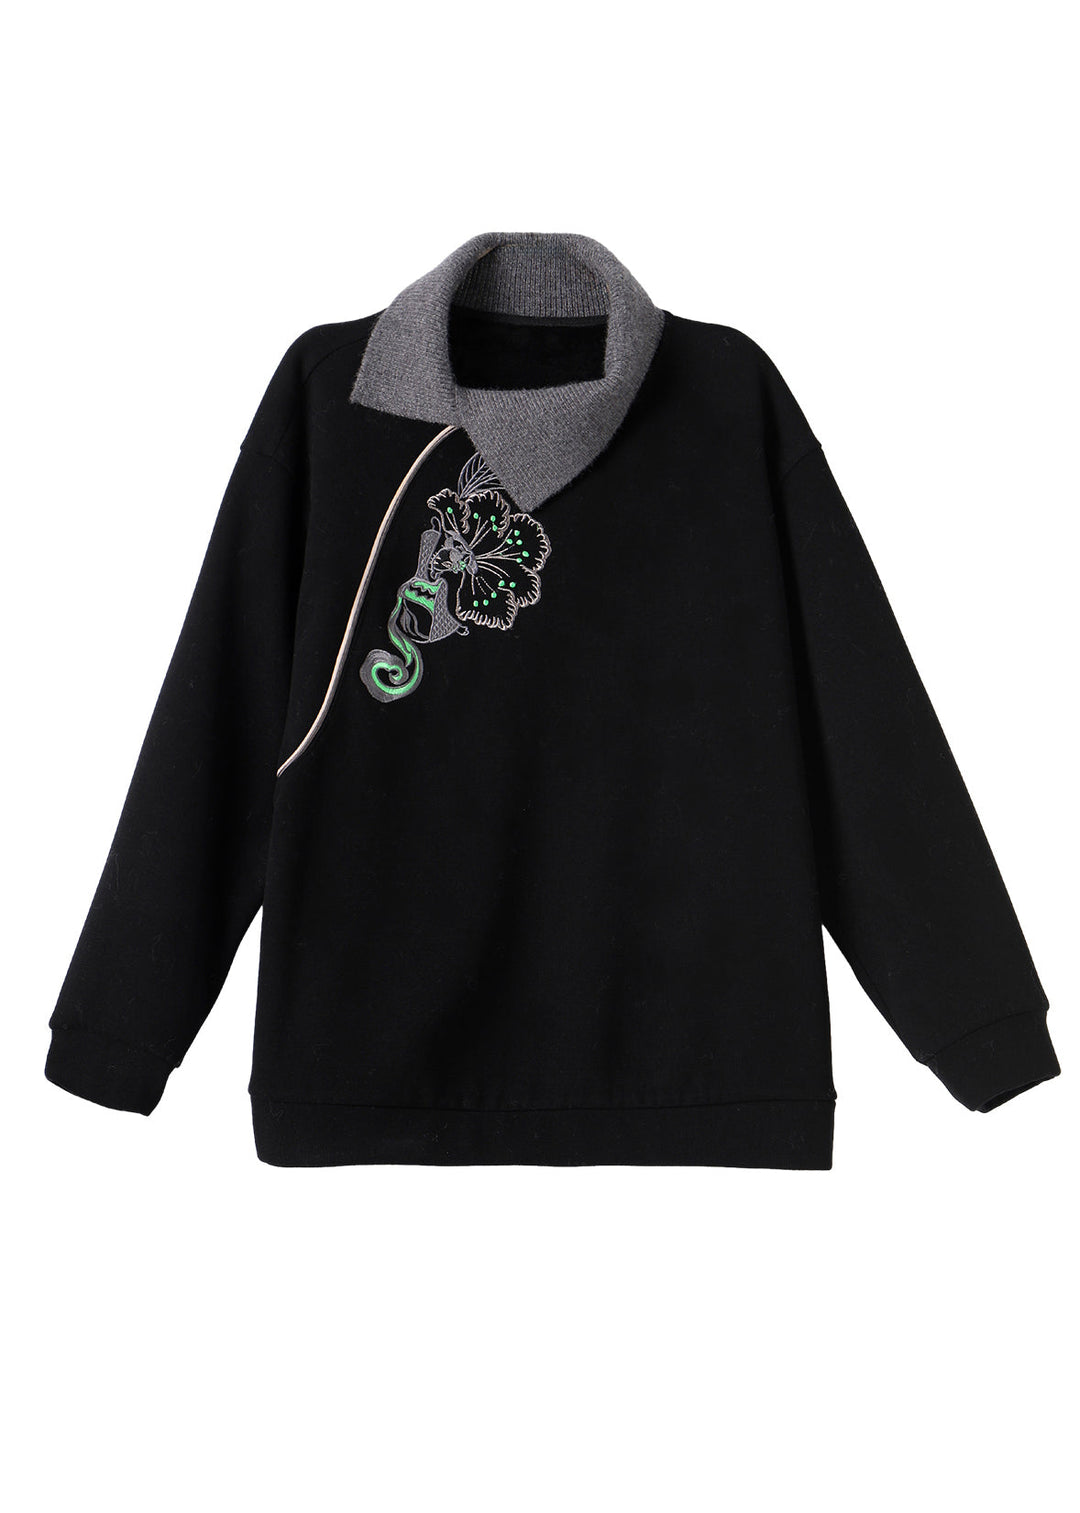 Style Black Embroideried Warm Fleece Tops Spring